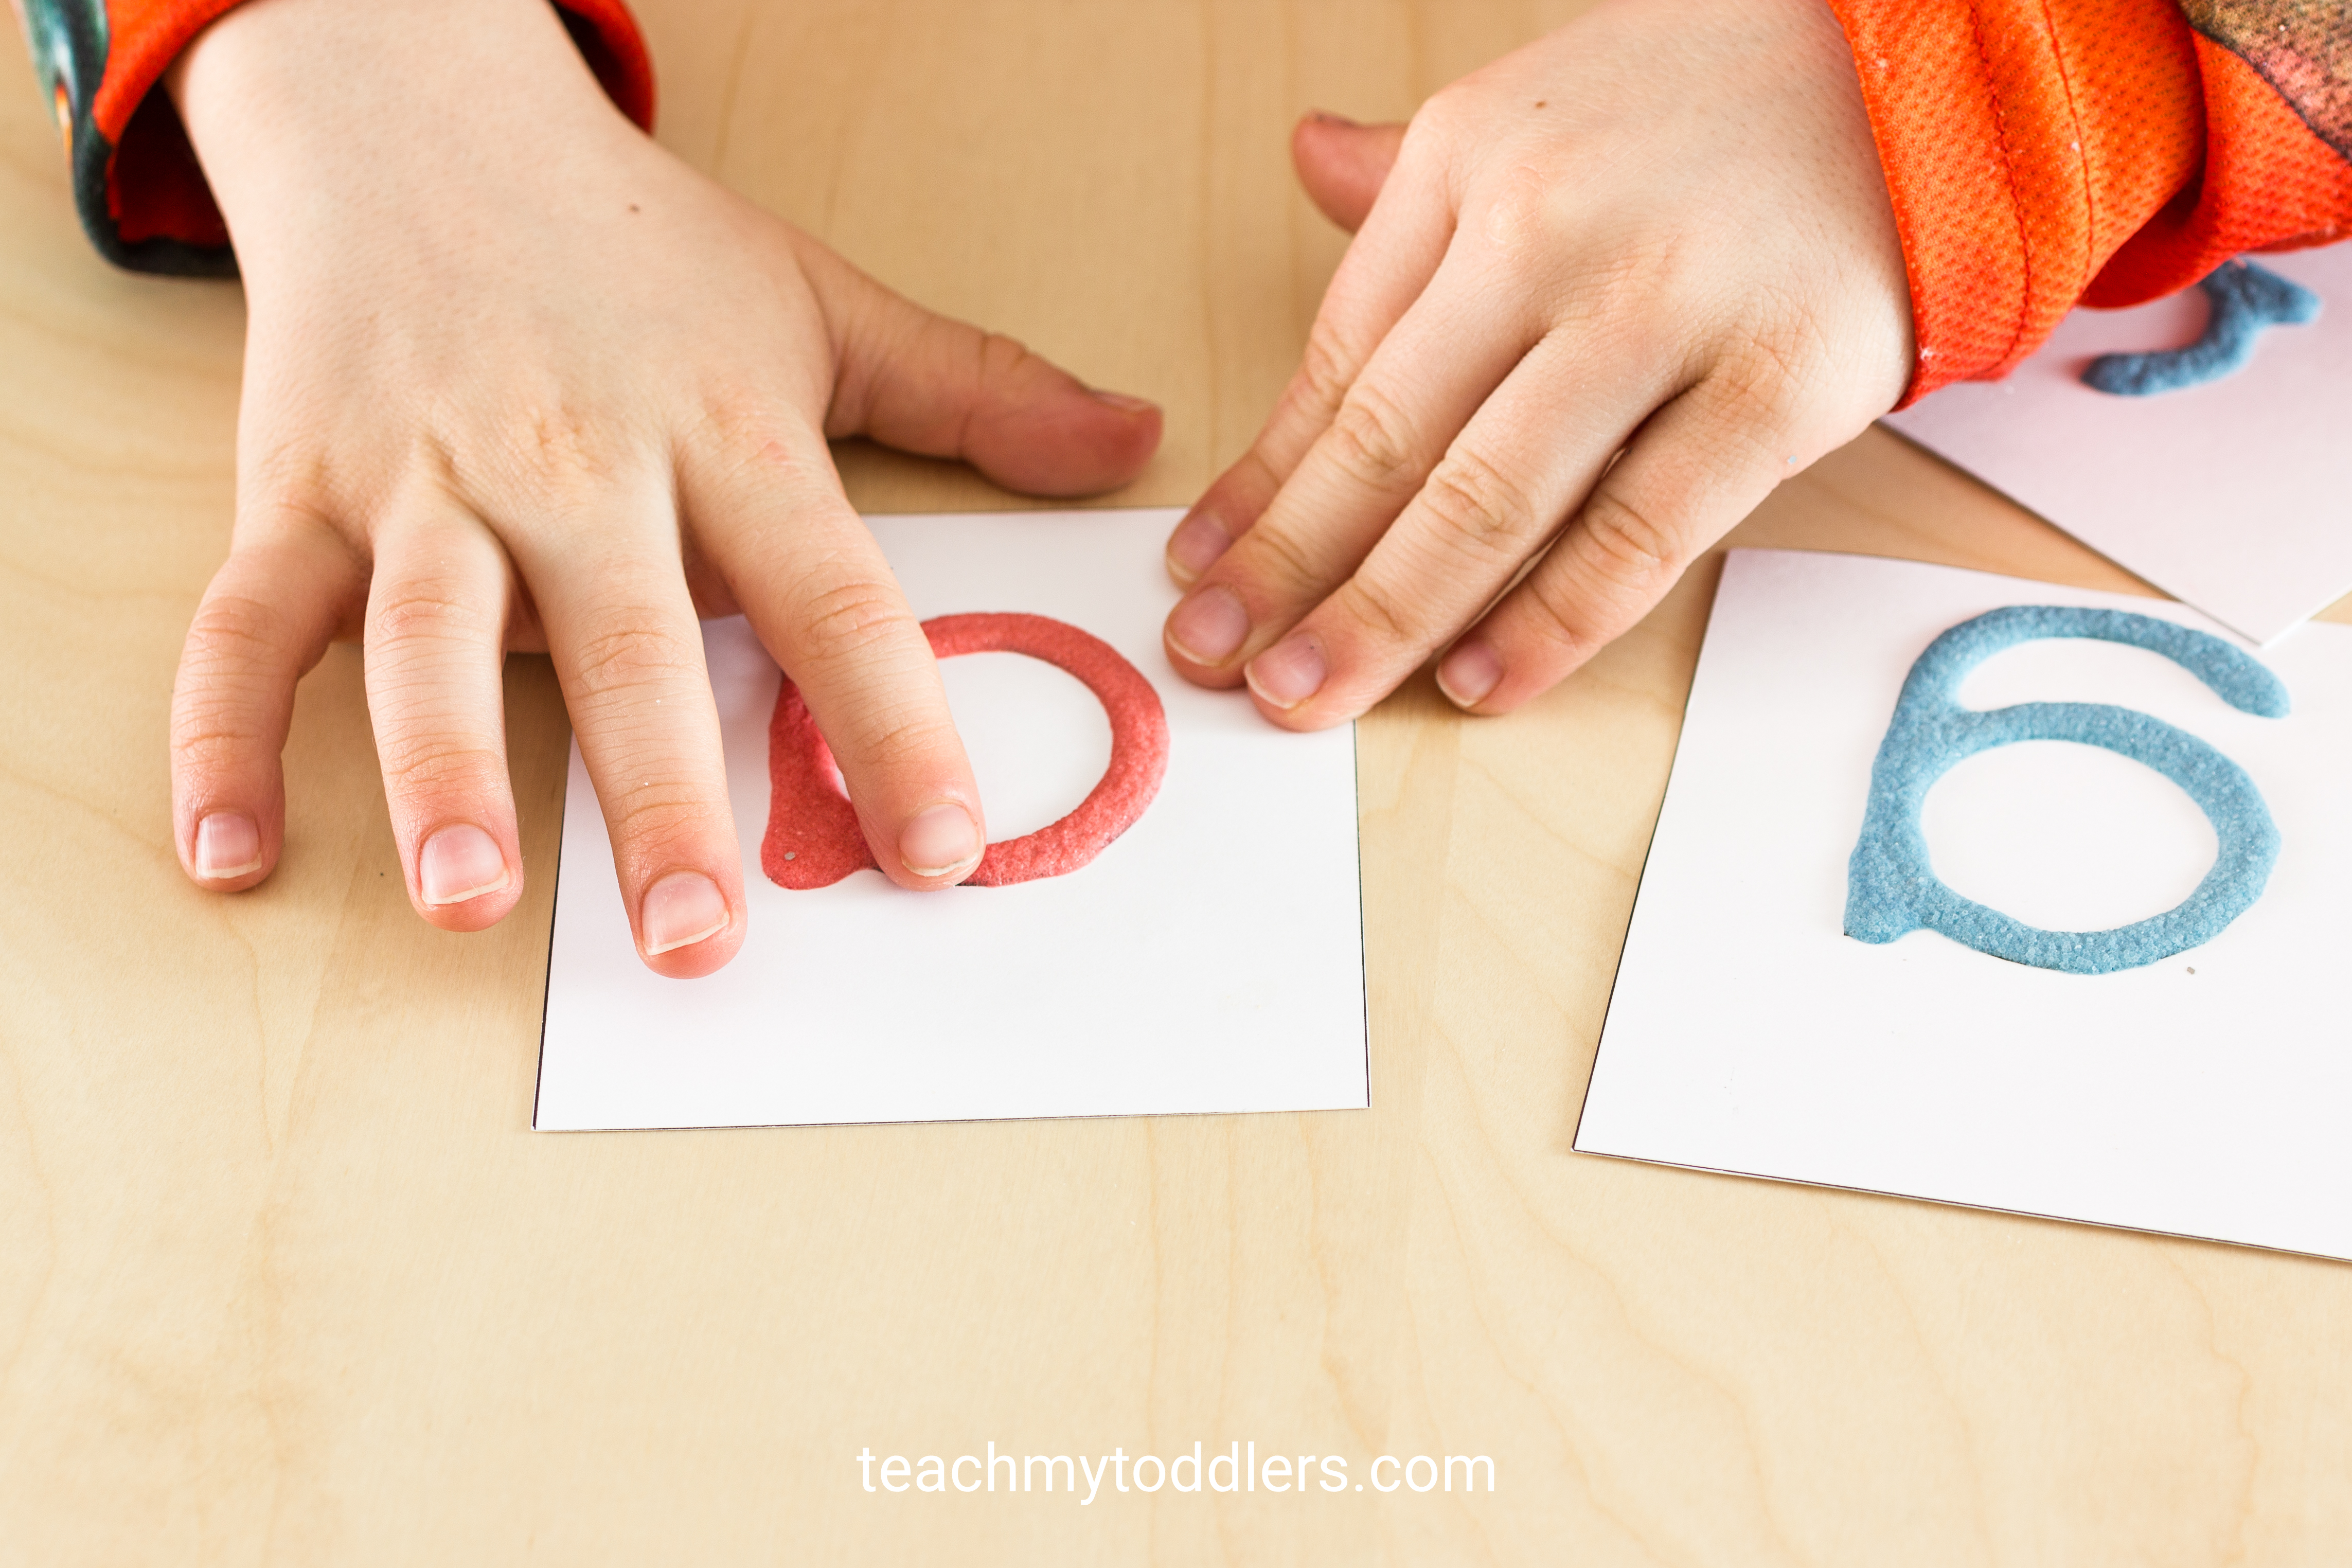 Learn how to use puffy paints to teach toddlers letters